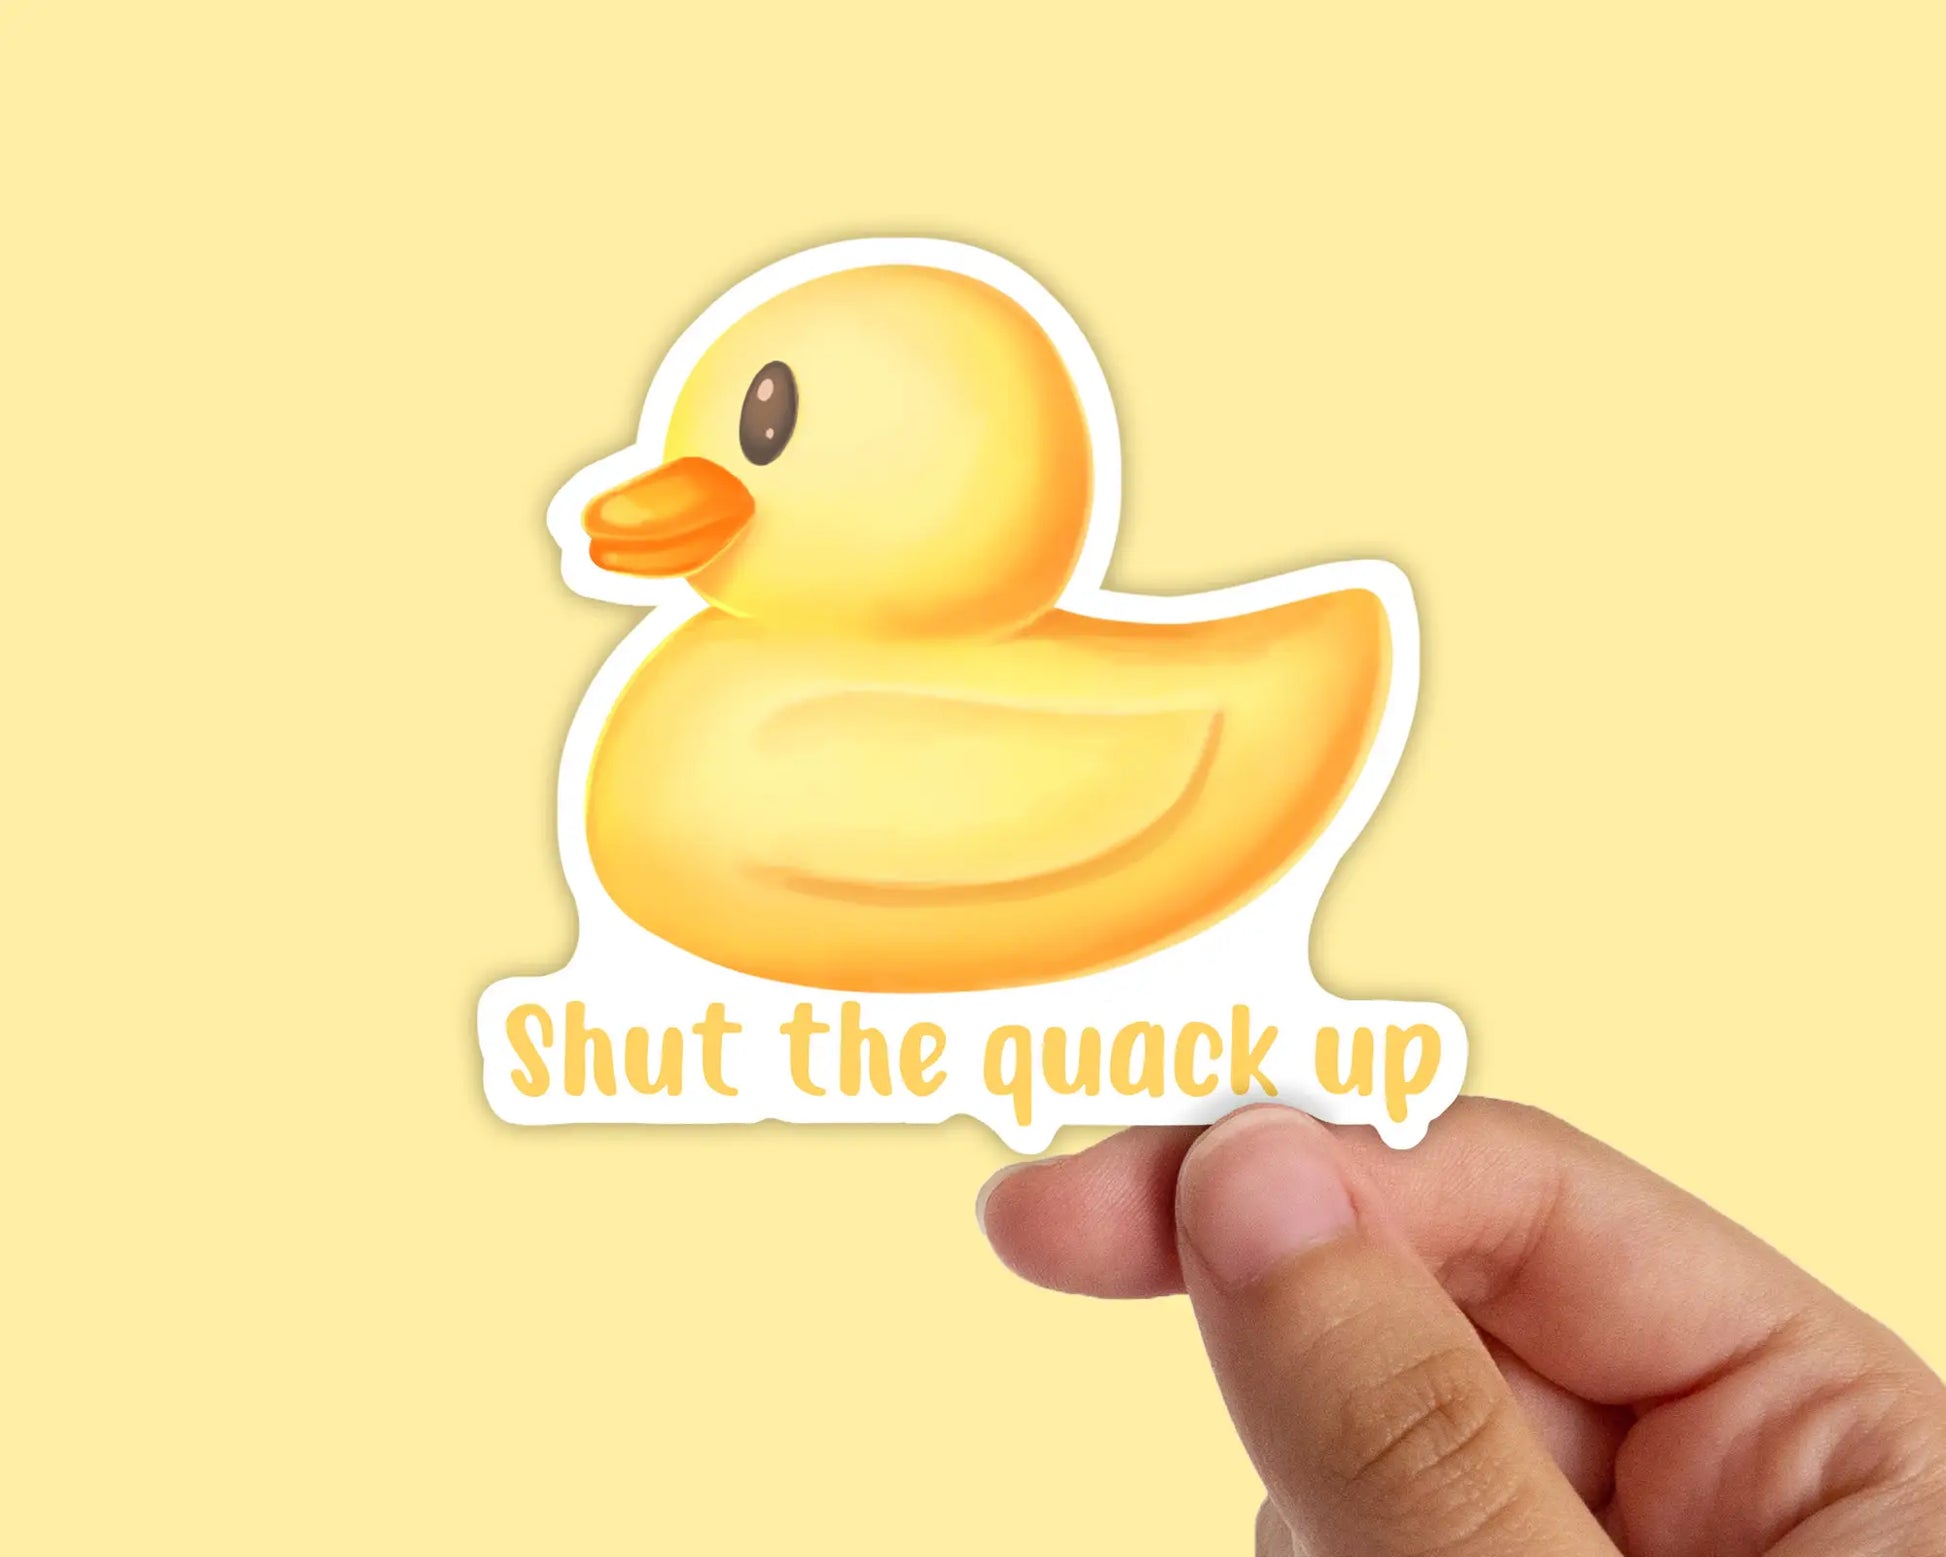 Autocollant Canard "Shut the quack up" Join The Creative Side